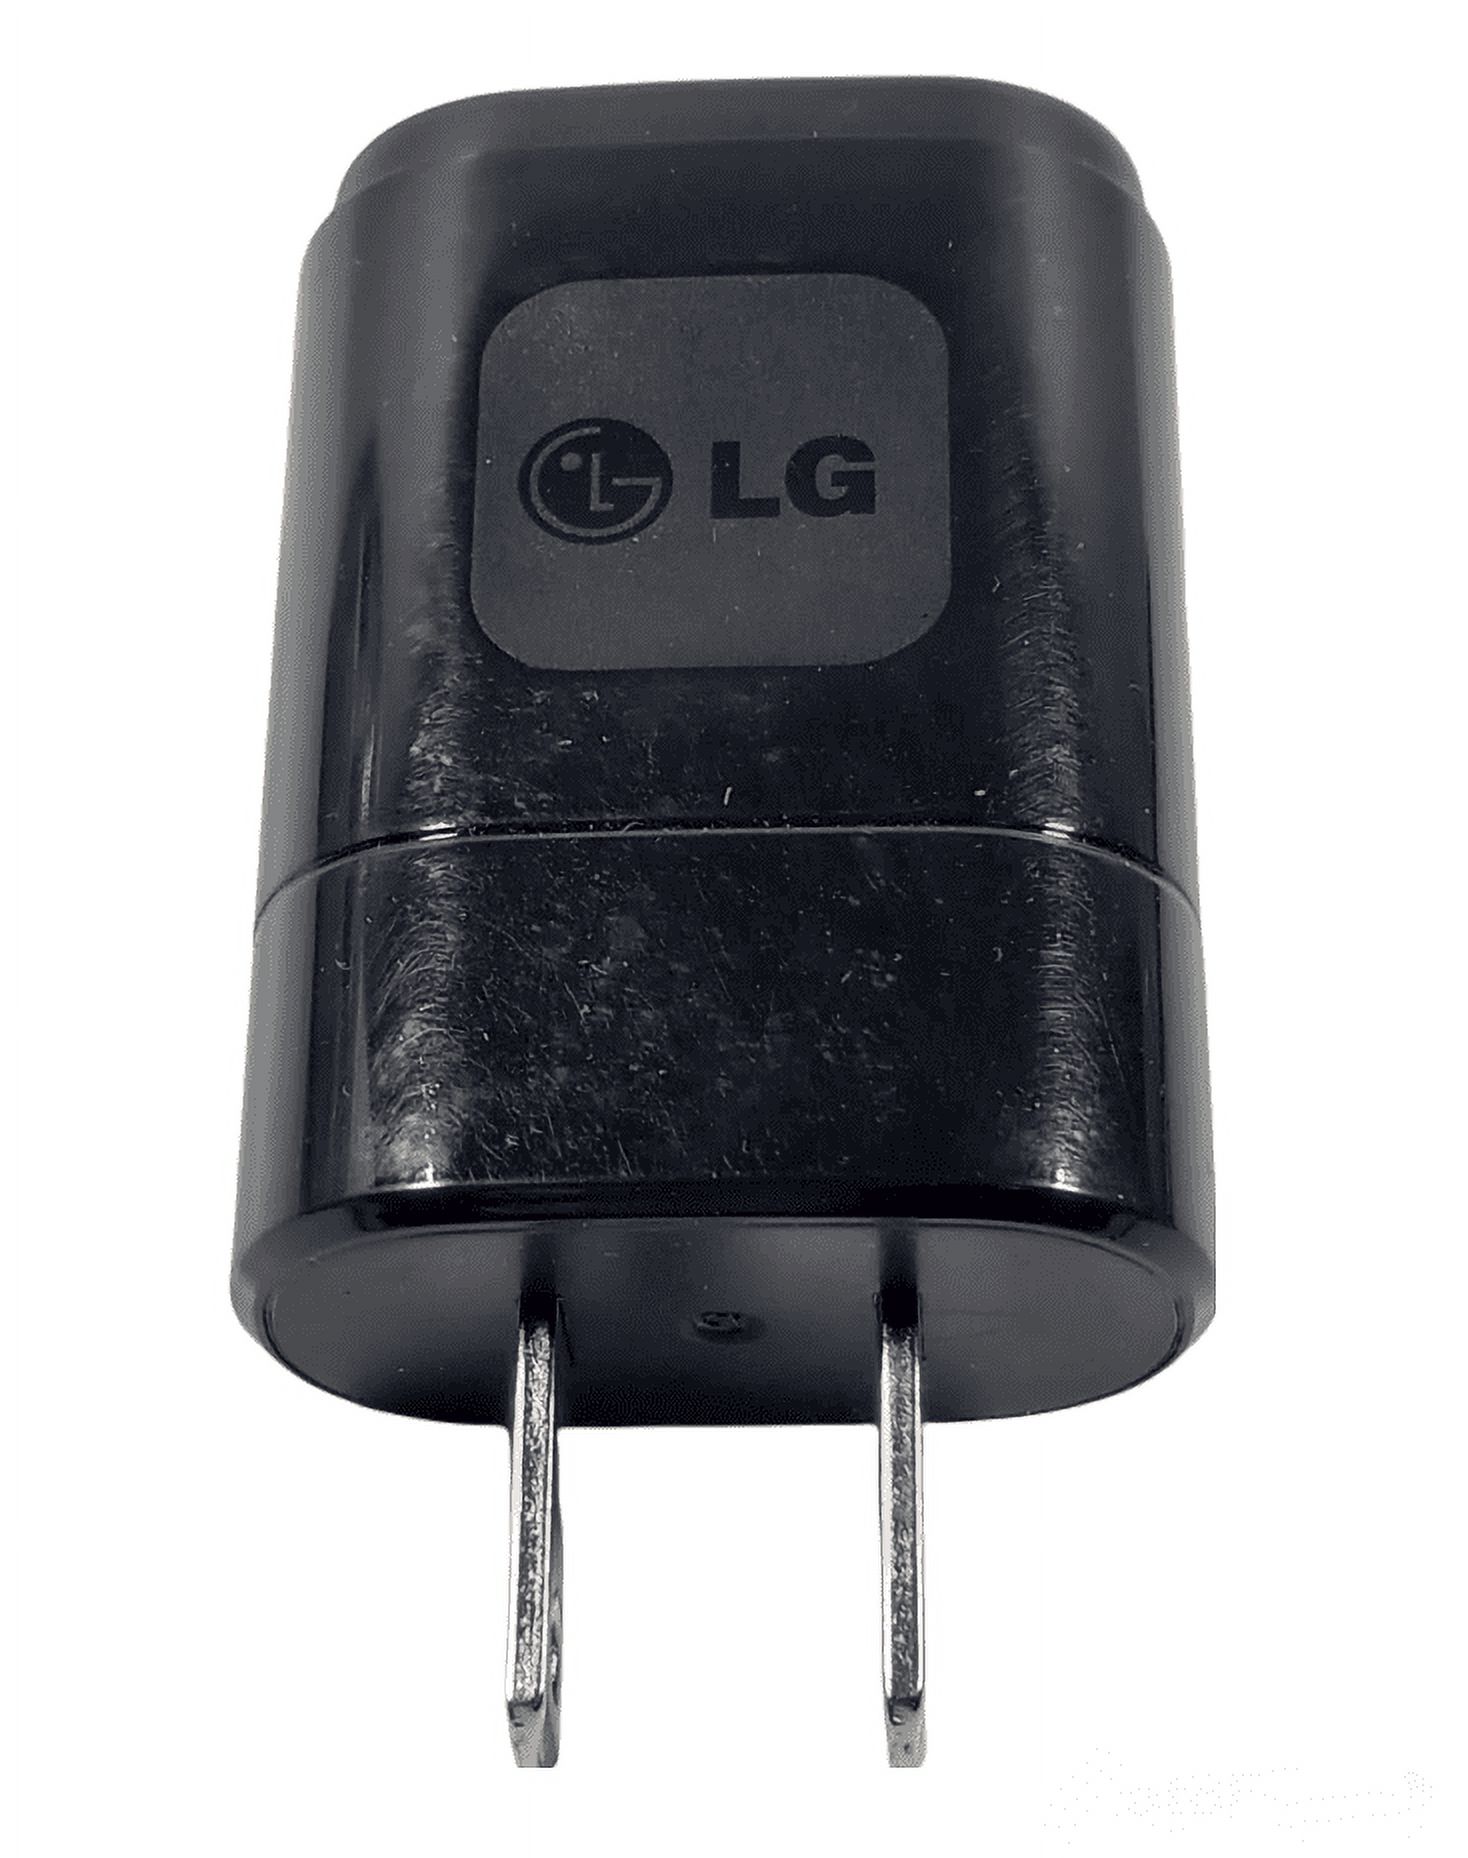 LG Universal USB AC Travel Wall Charger Power Adapter Head MCS-01WR - image 2 of 4